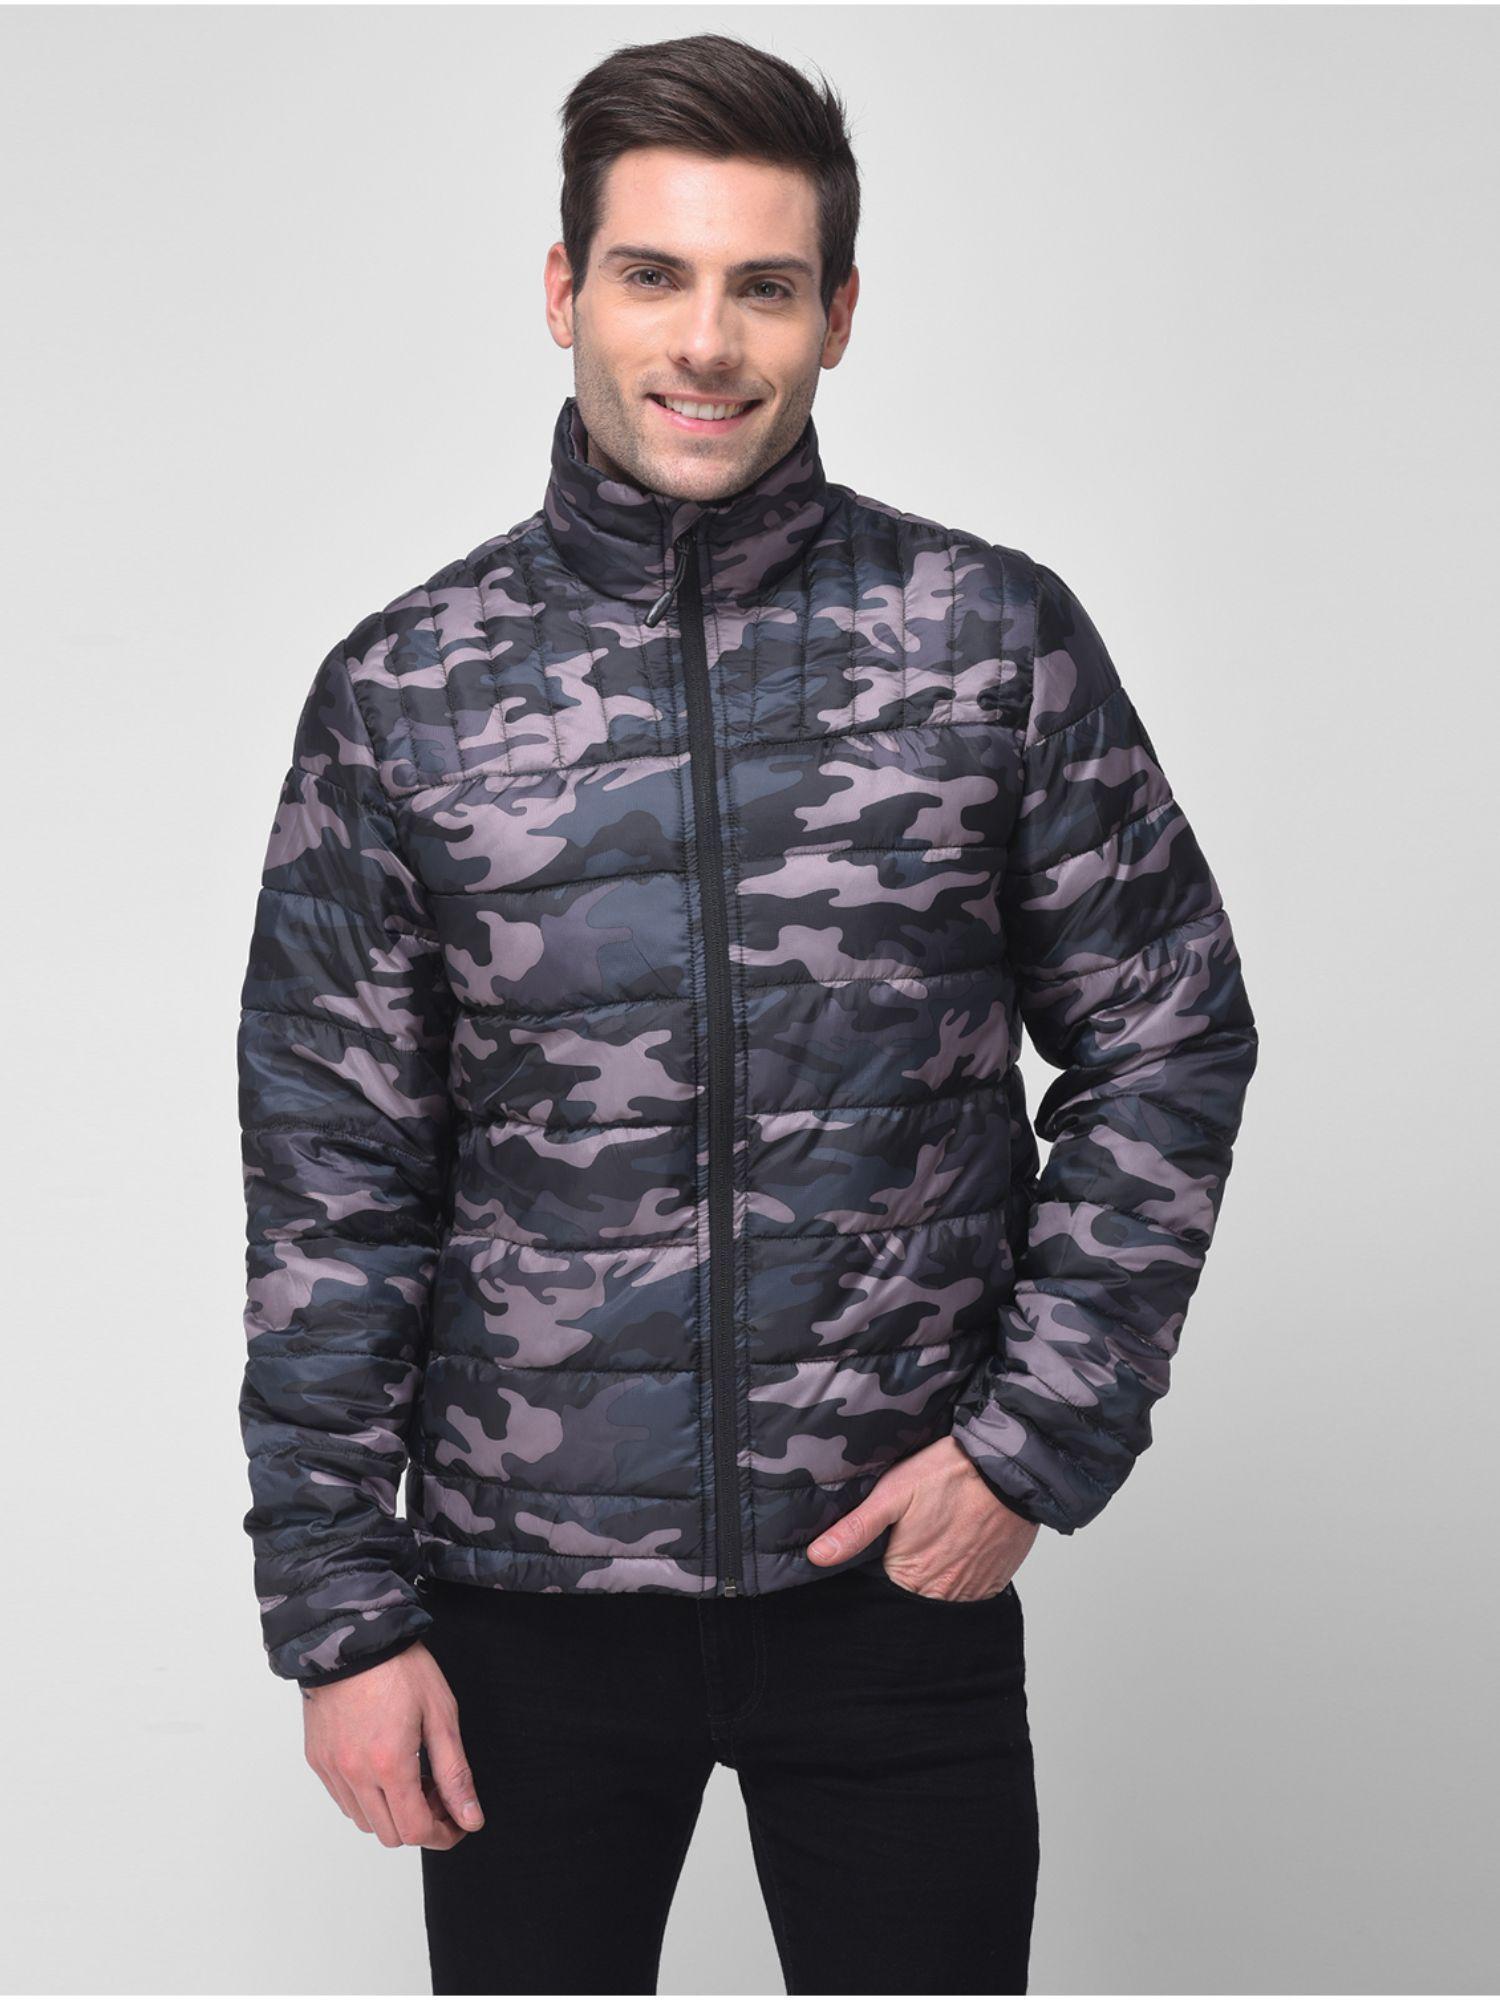 mens camouflage full sleeves multi-color jacket